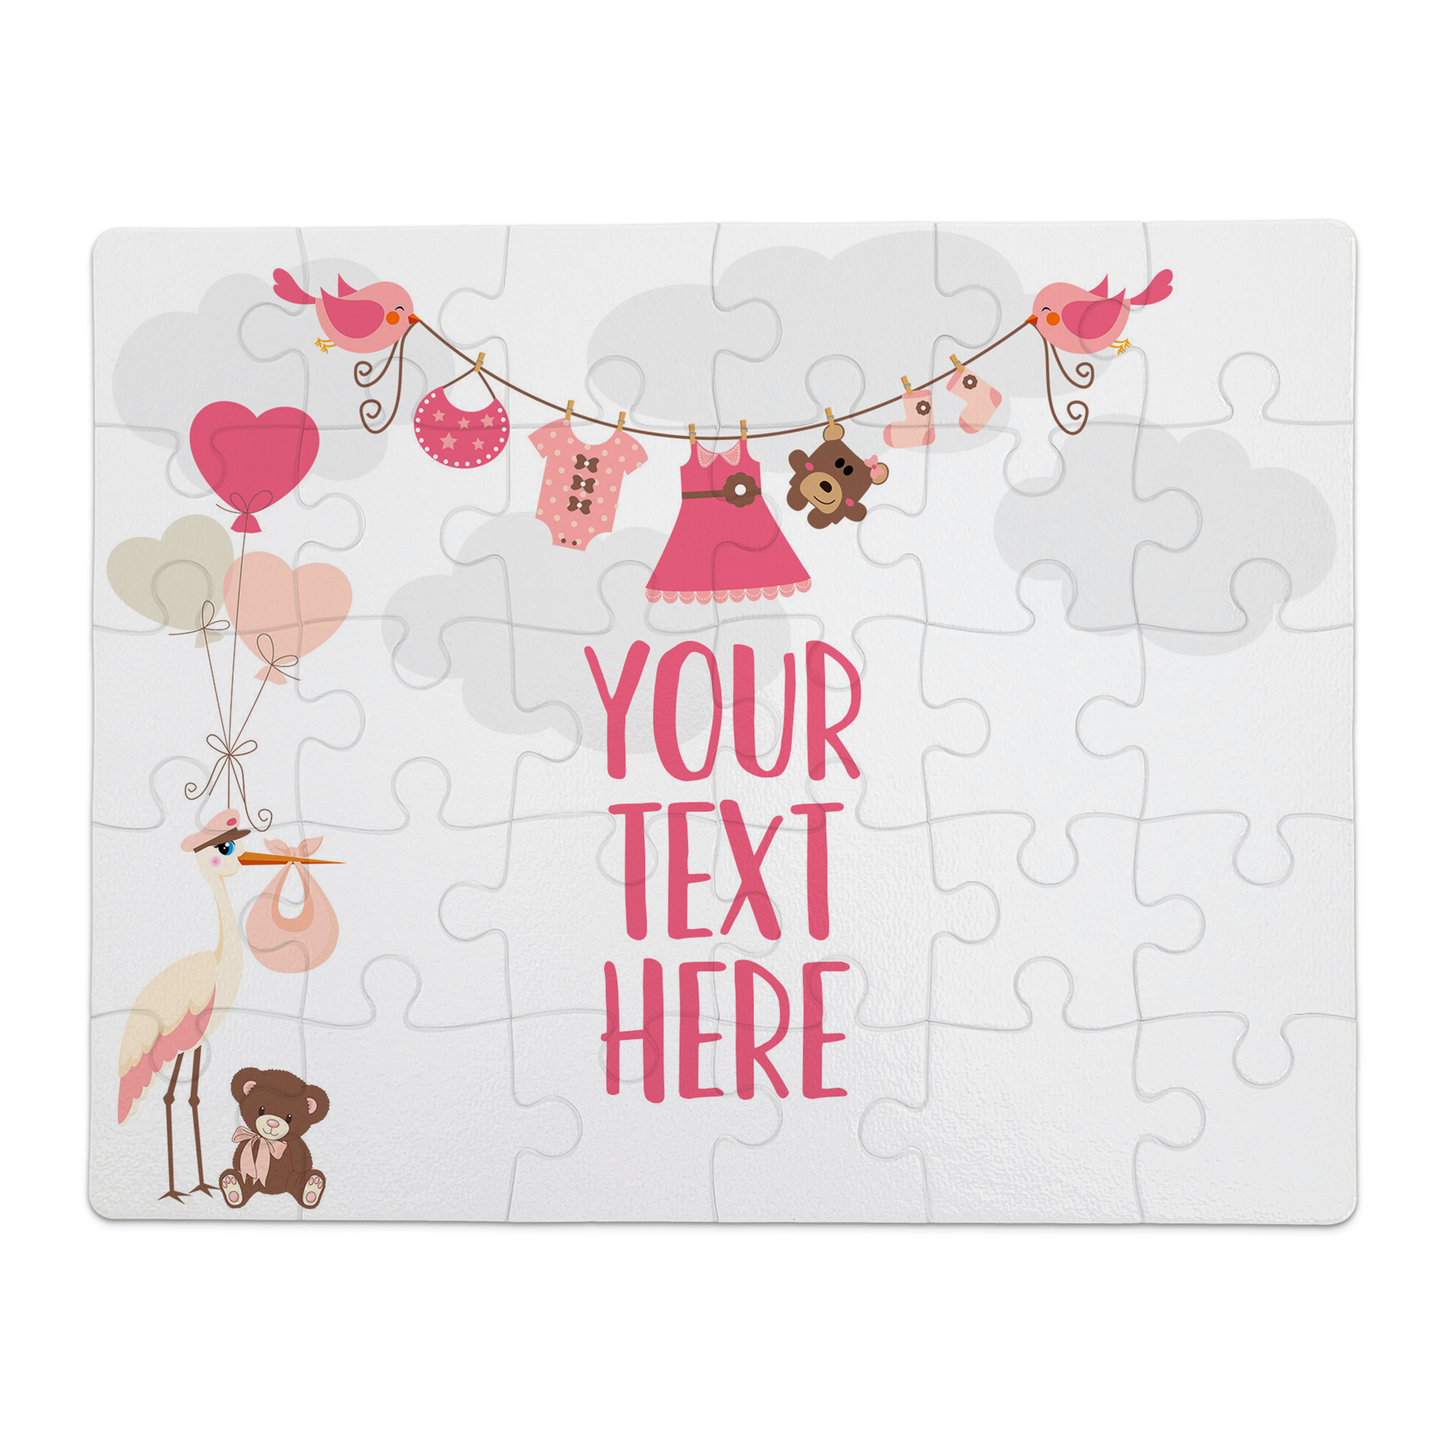 Create Your Own Puzzle - Stork Design - CYOP0252 | S'Berry Boutique